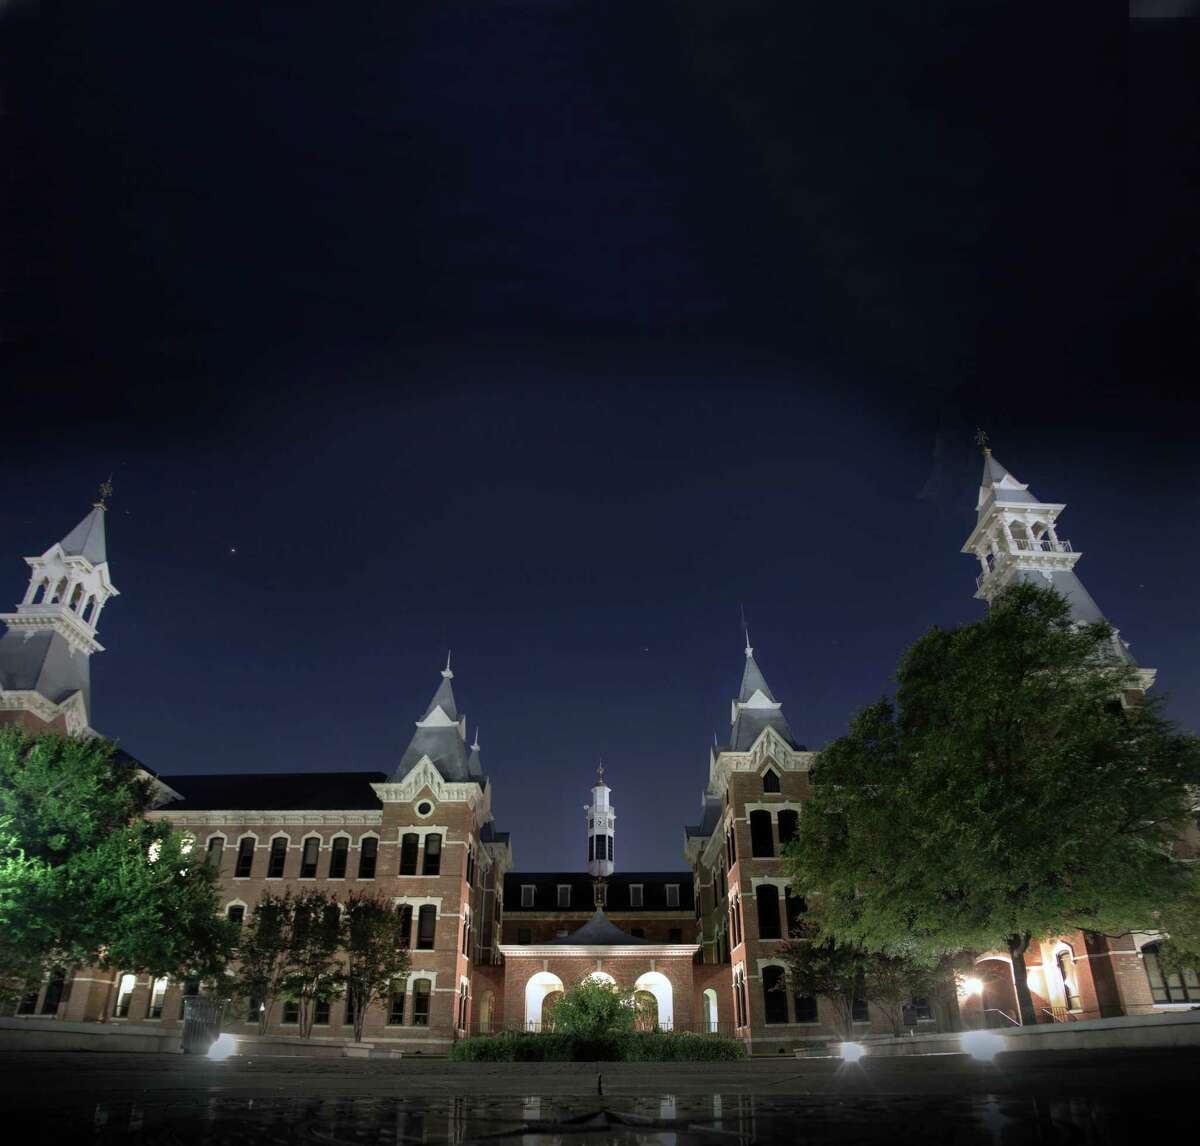 The treatment of numerous sexual assault victims has cast a pall over the Baylor campus in Waco.